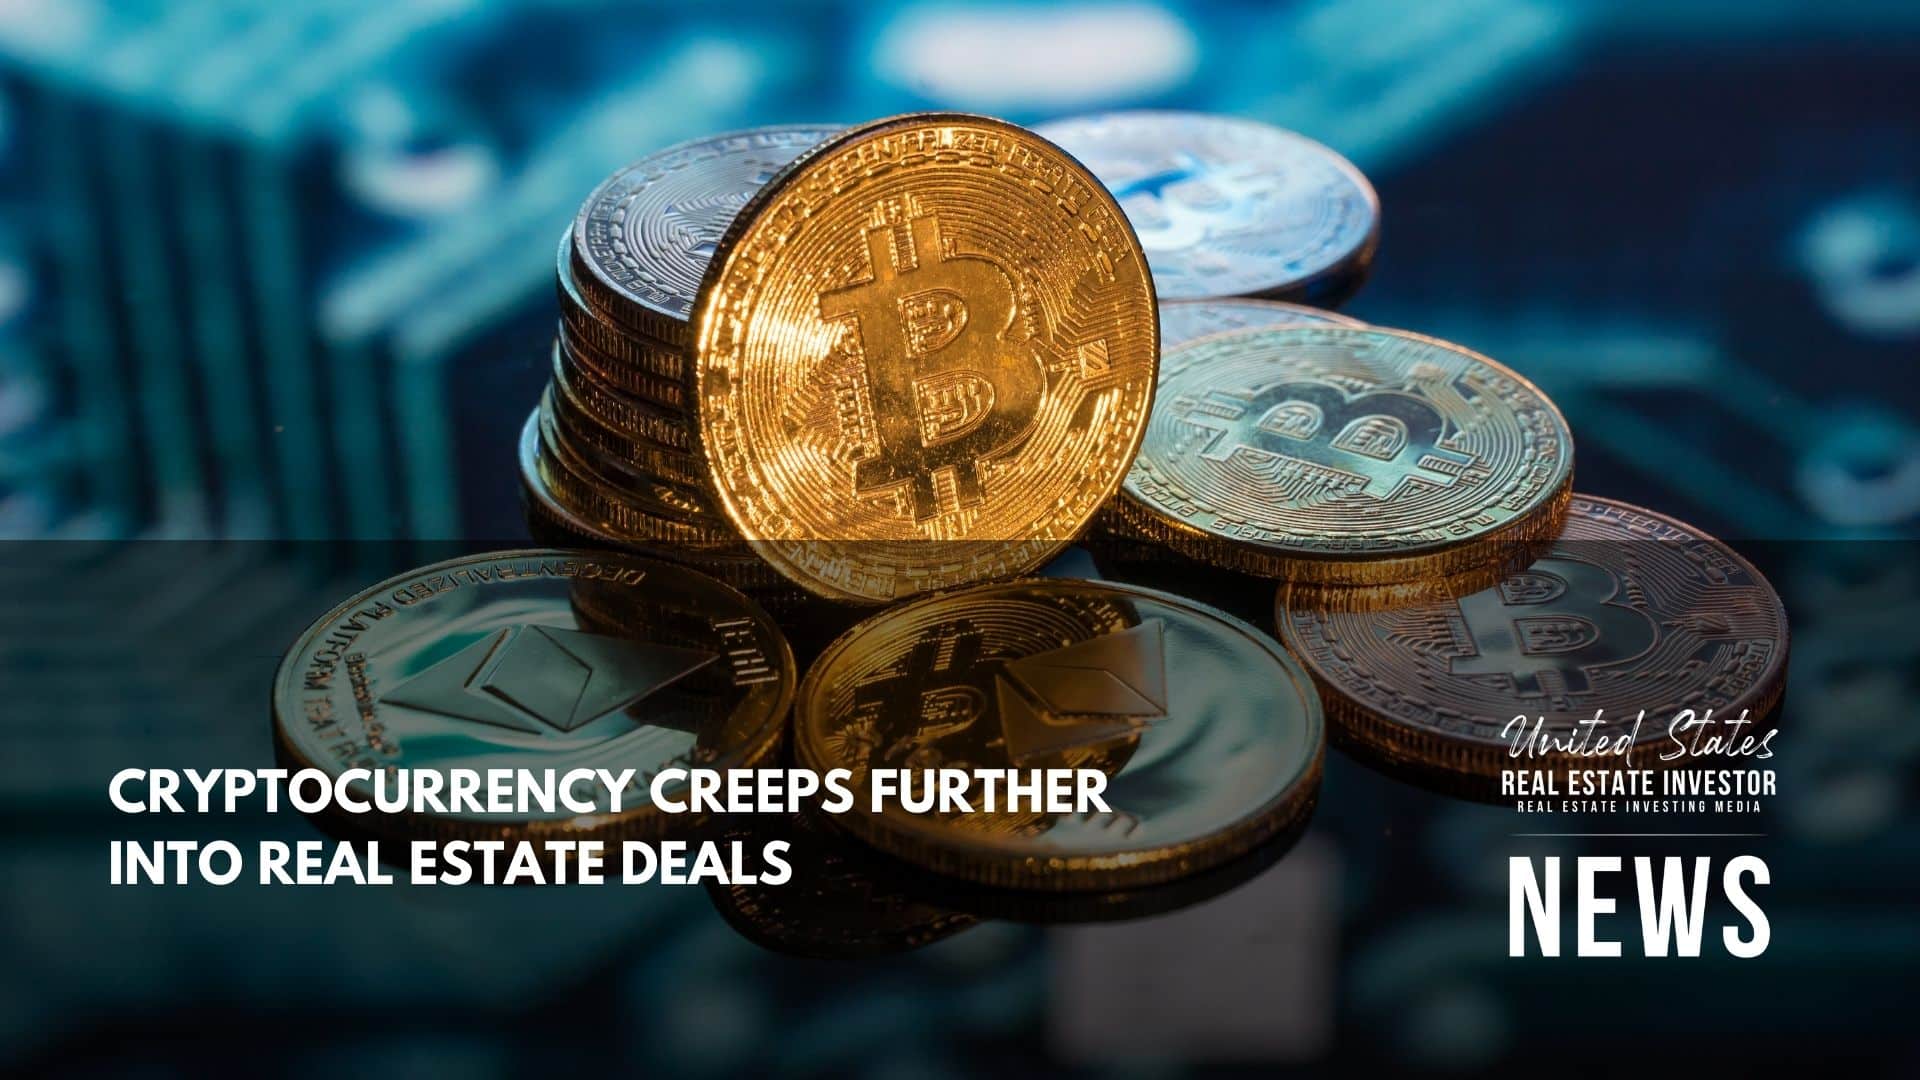 United States Real Estate Investor - Real estate investing media - Cryptocurrency Creeps Further Into Real Estate Deals